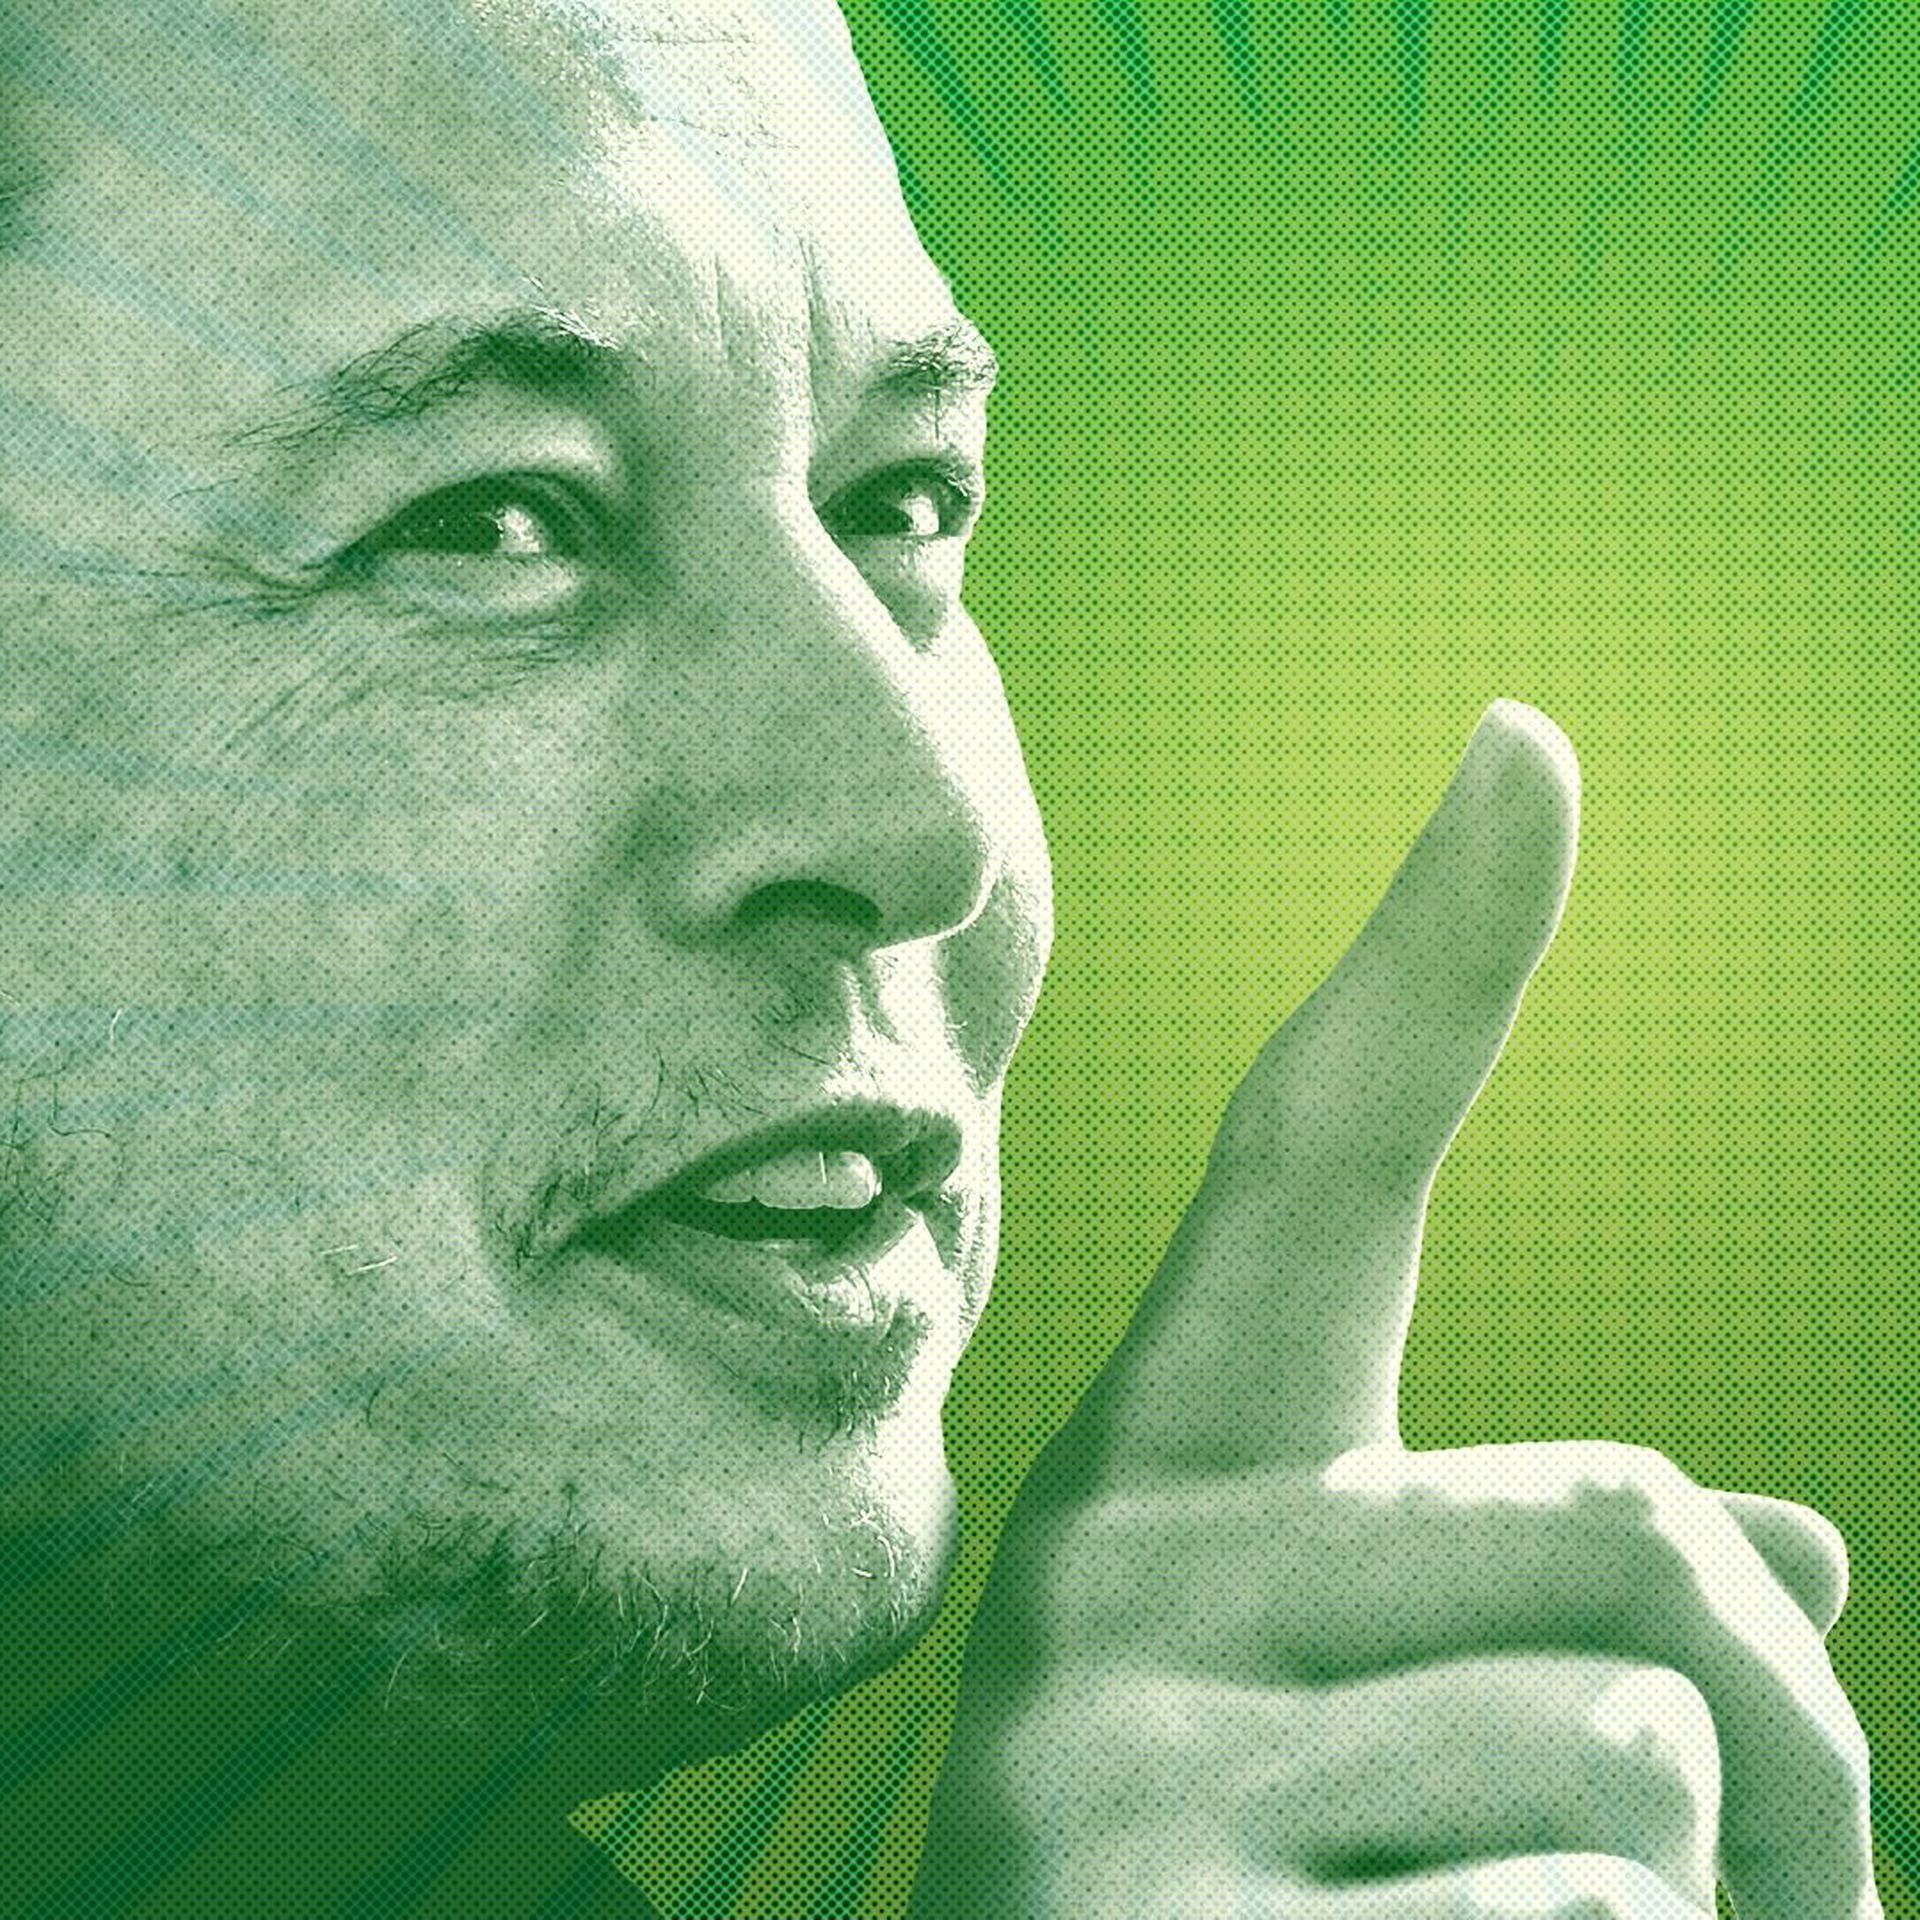 Photo illustration of Elon Musk stylized as a comic book character